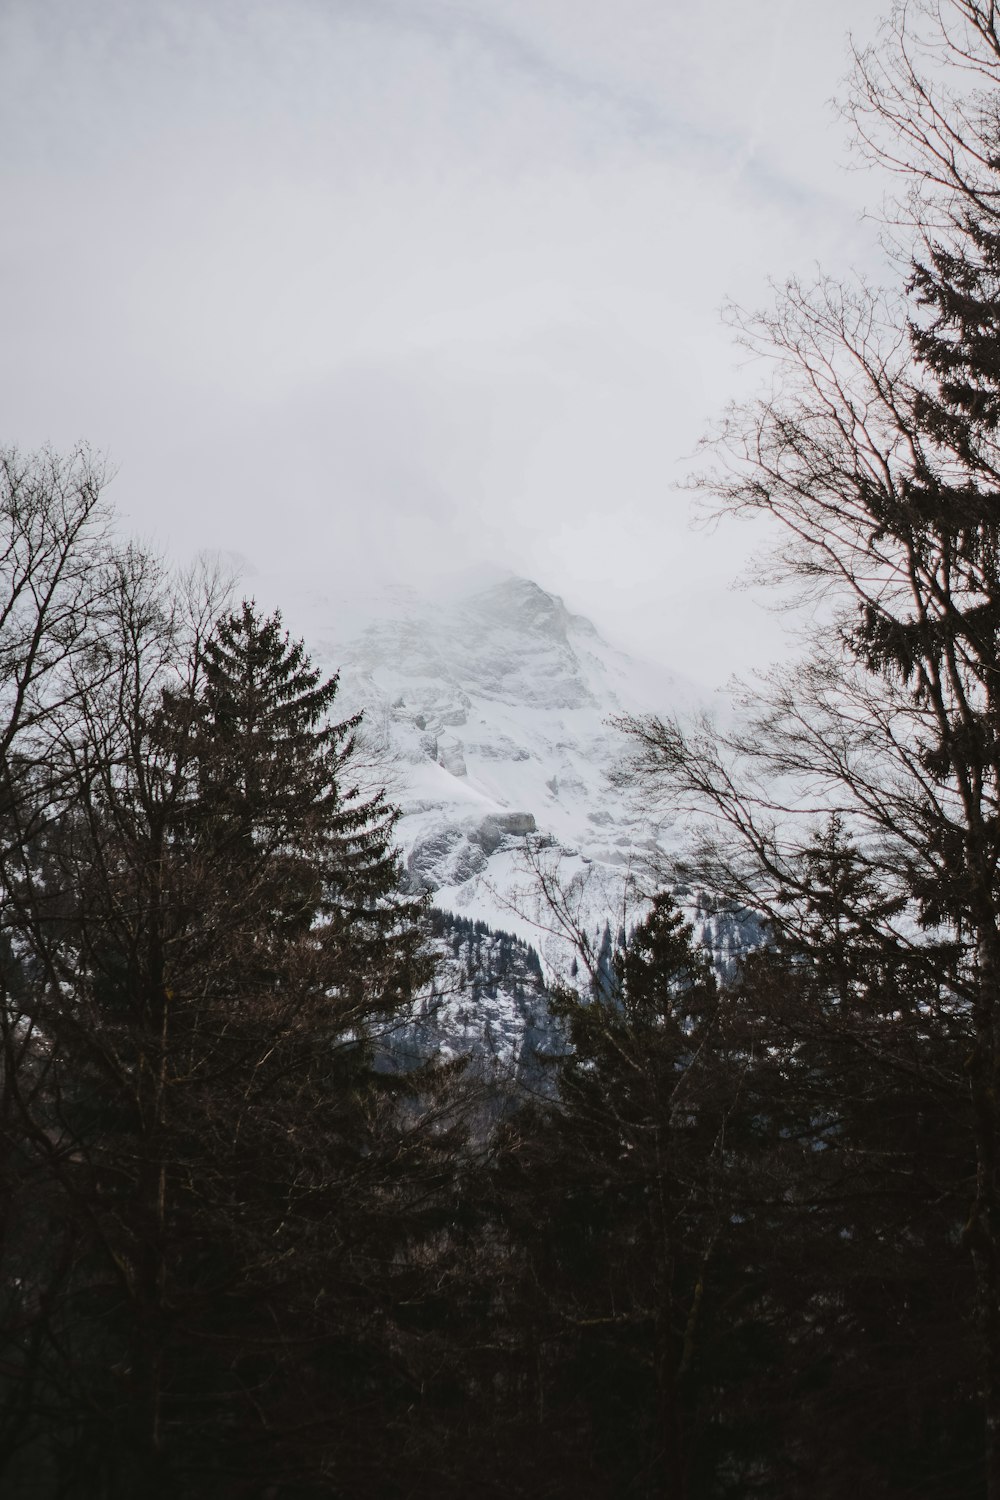 a snowy mountain with trees in the foreground